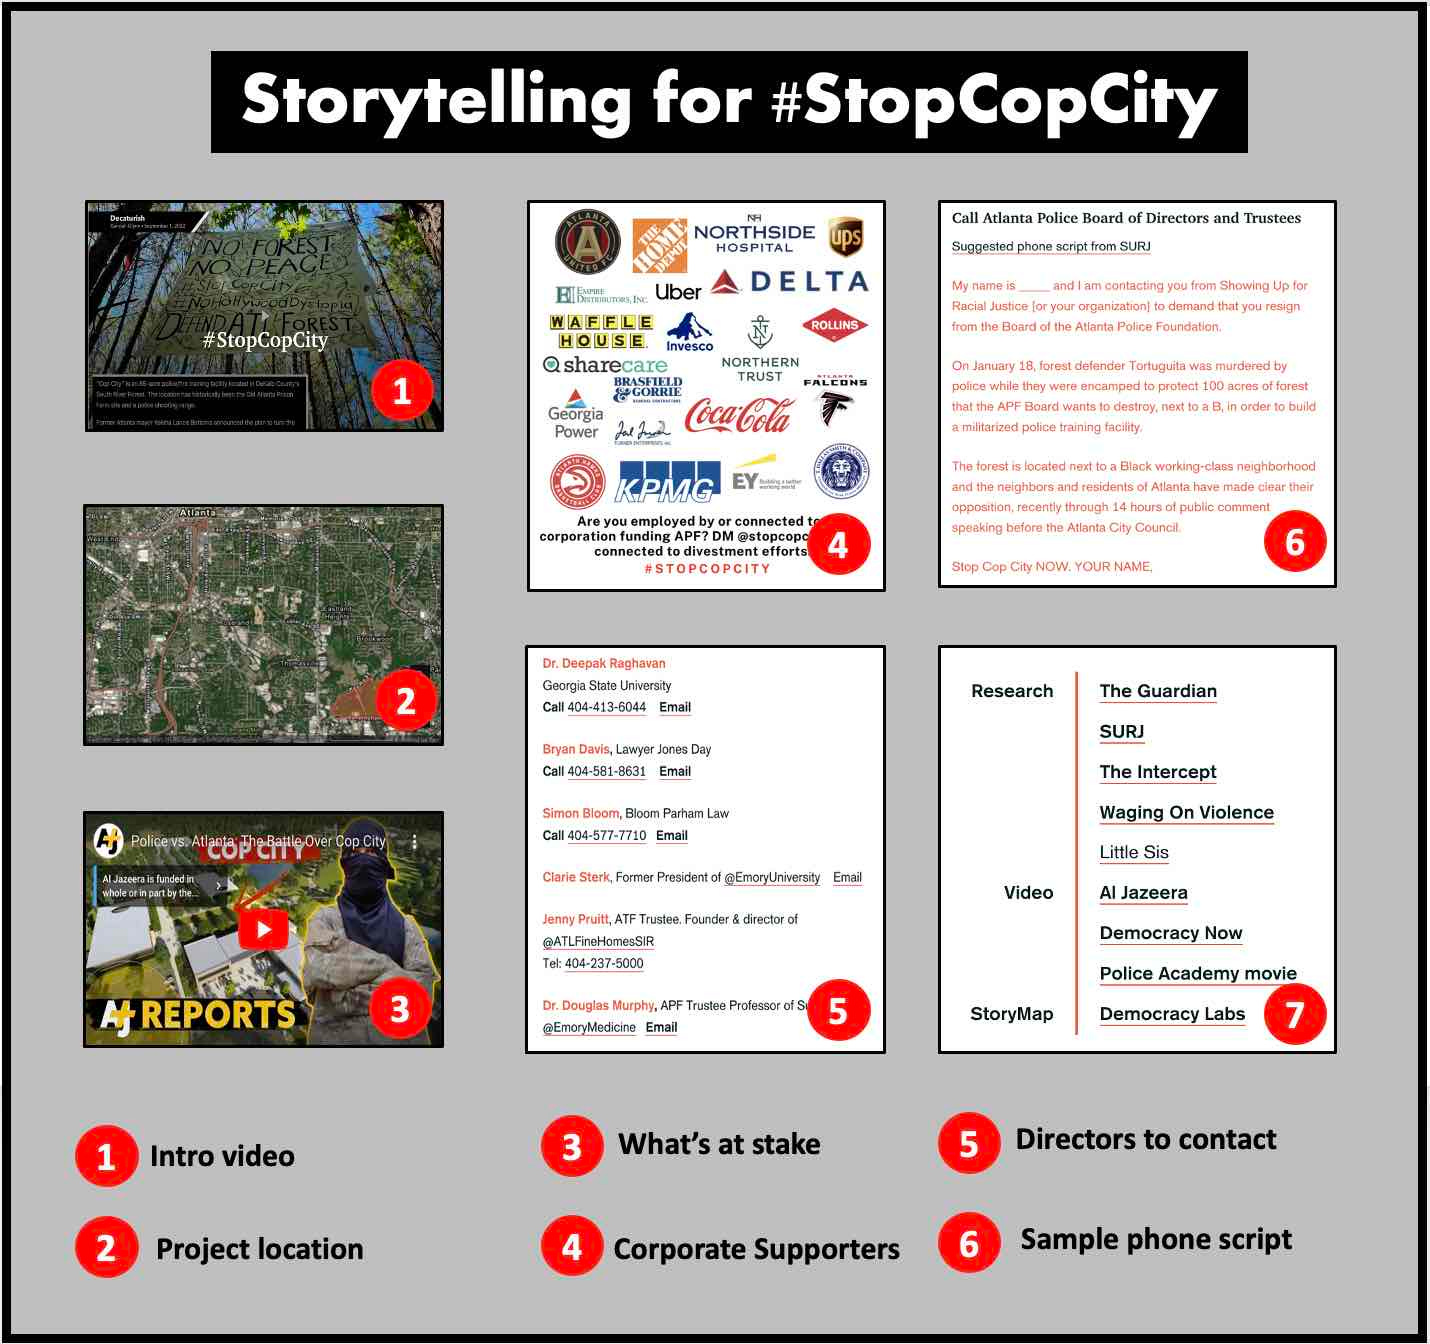 Storytelling to mobilize support for an evolving issue like #STOPCOPCITY